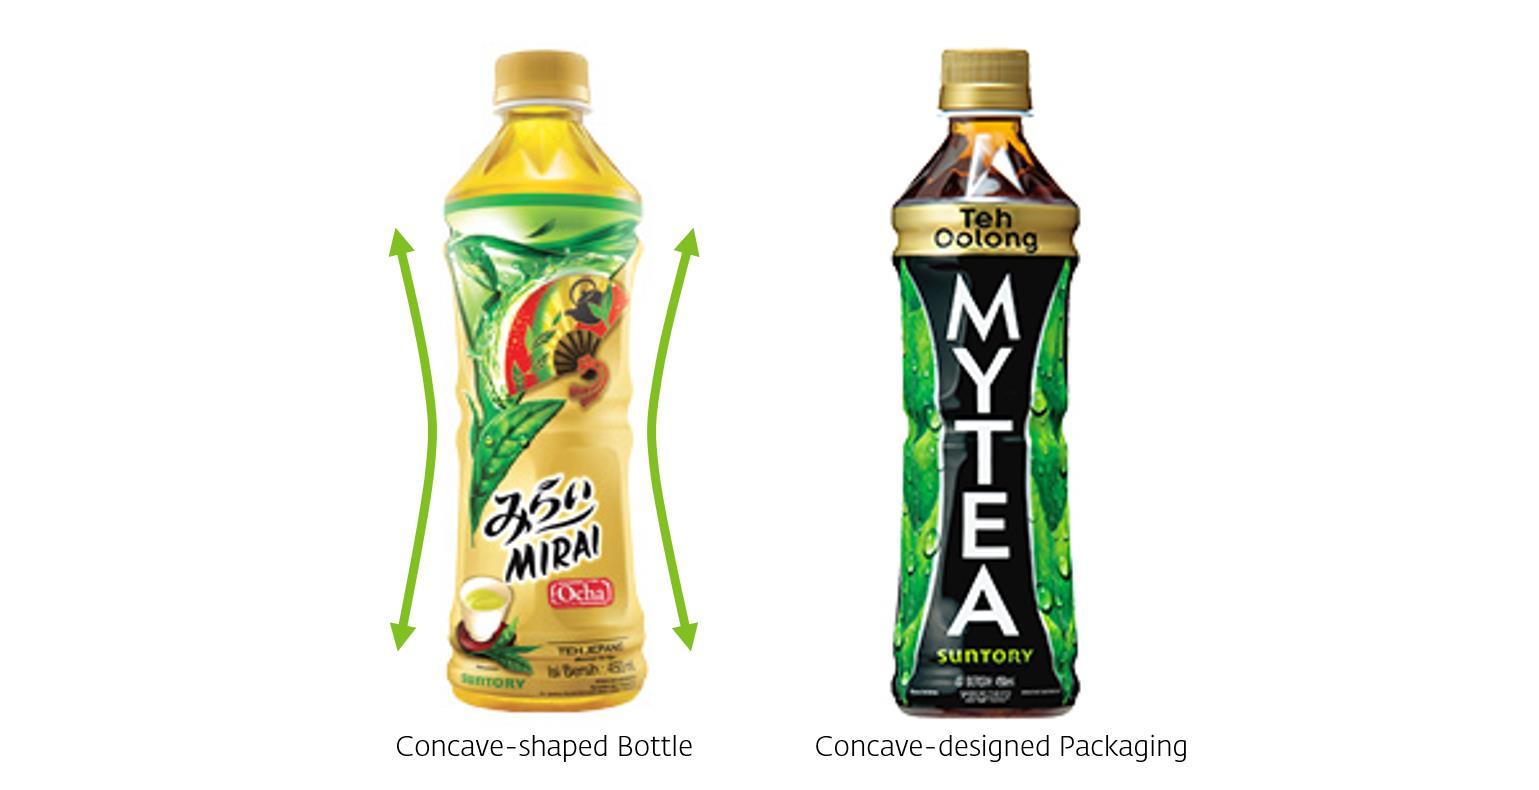 A Market Entry Research for RTD Tea contains Mytea's packaging design.